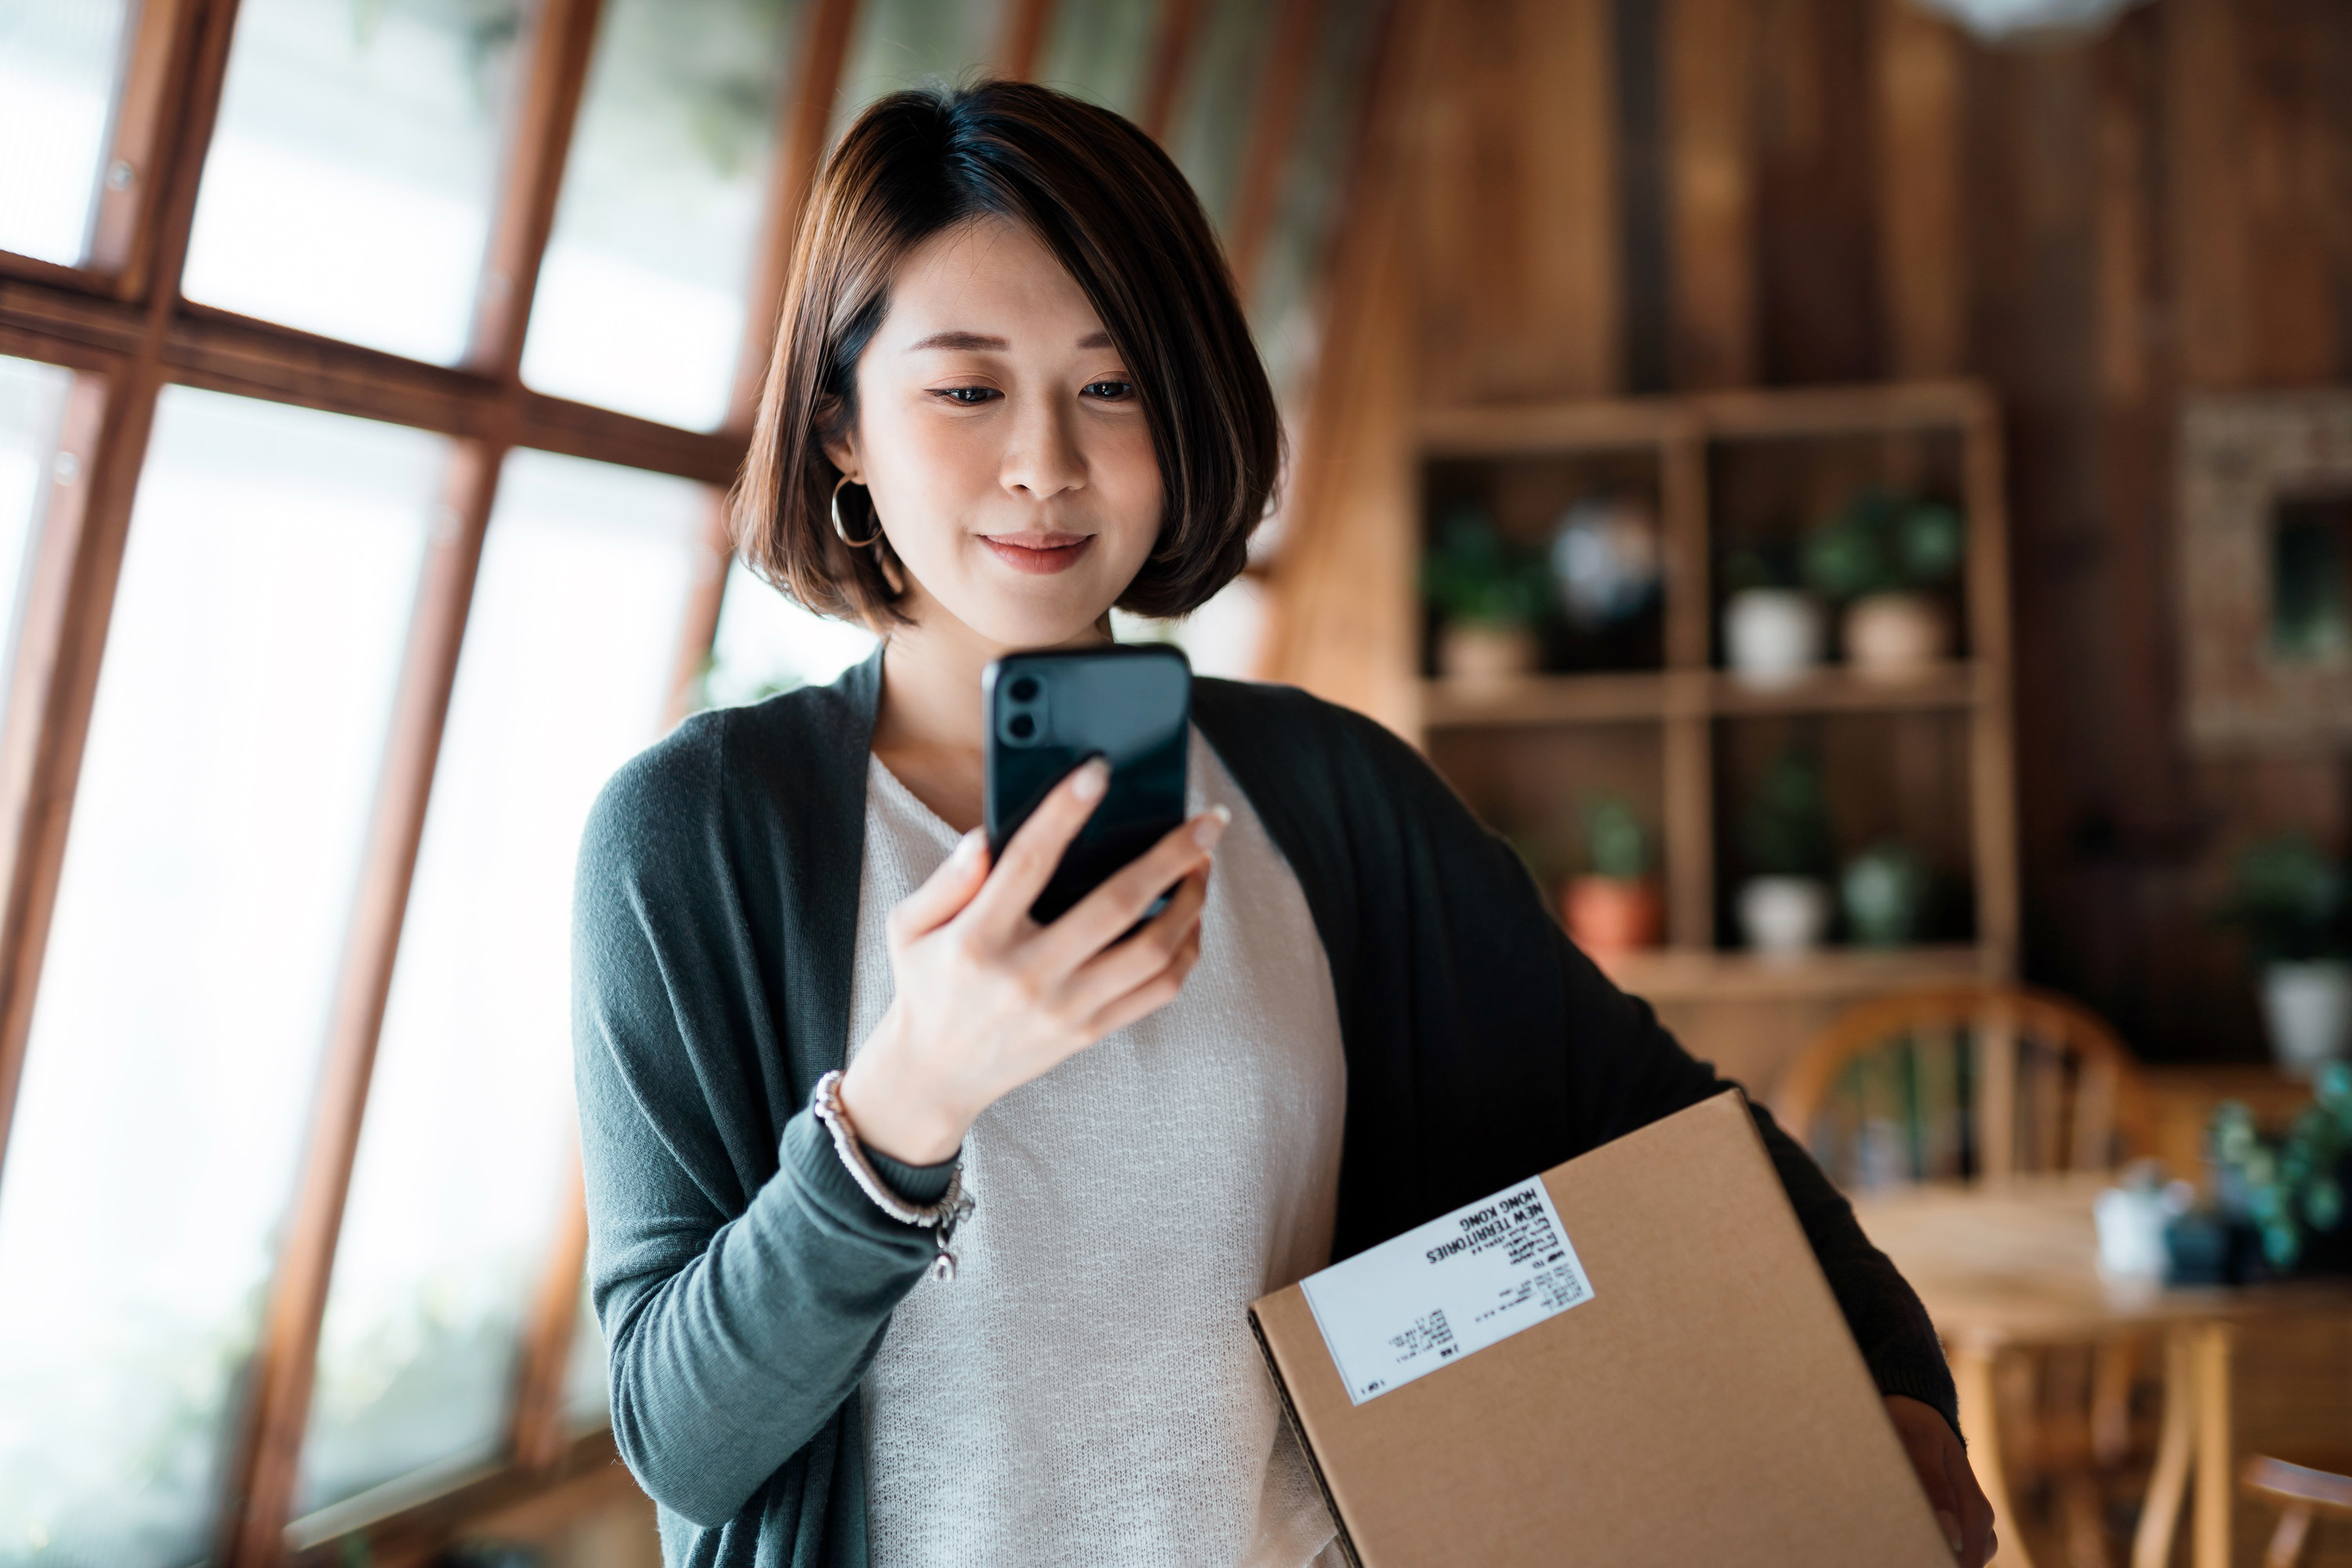 A woman looking at a phone while she holds a box